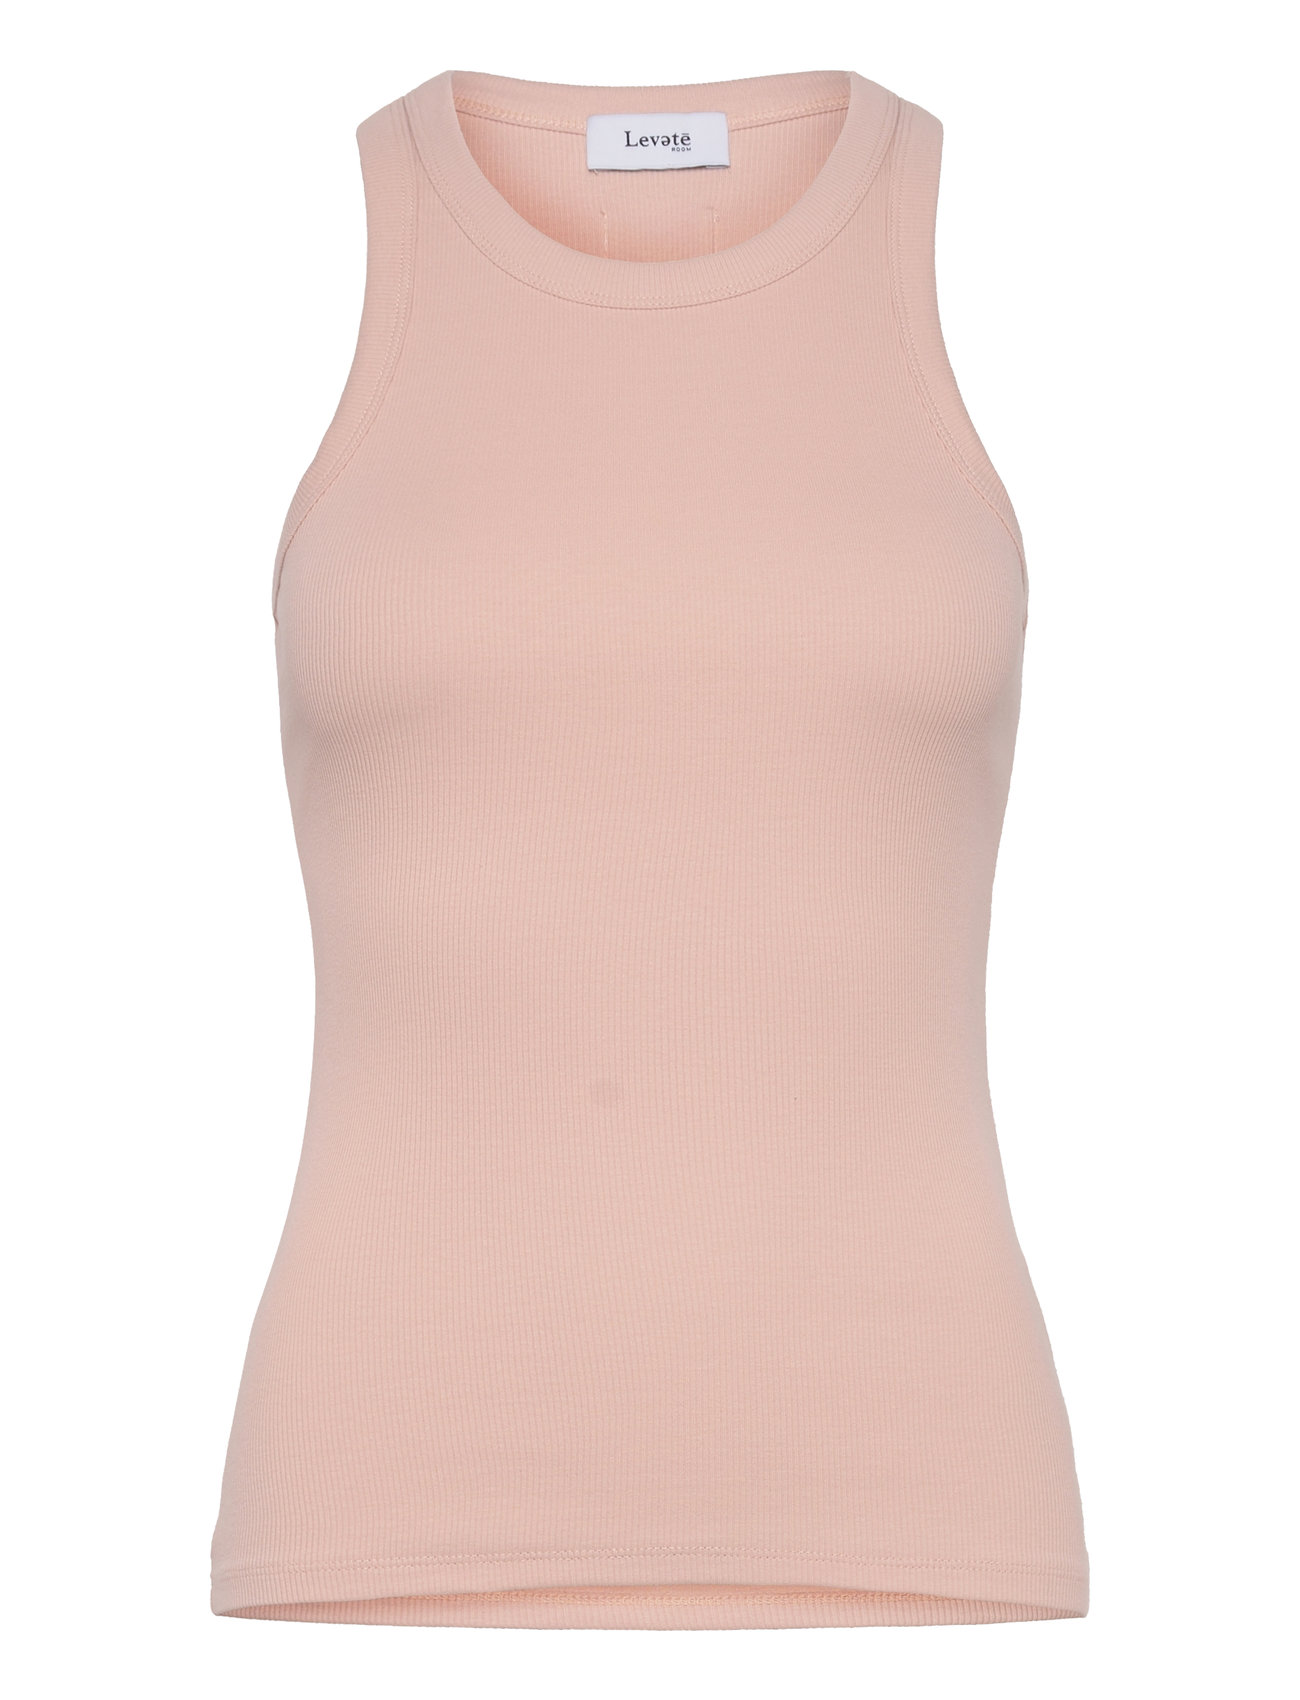 Lr-Numbia Tops T-shirts & Tops Sleeveless Pink Levete Room